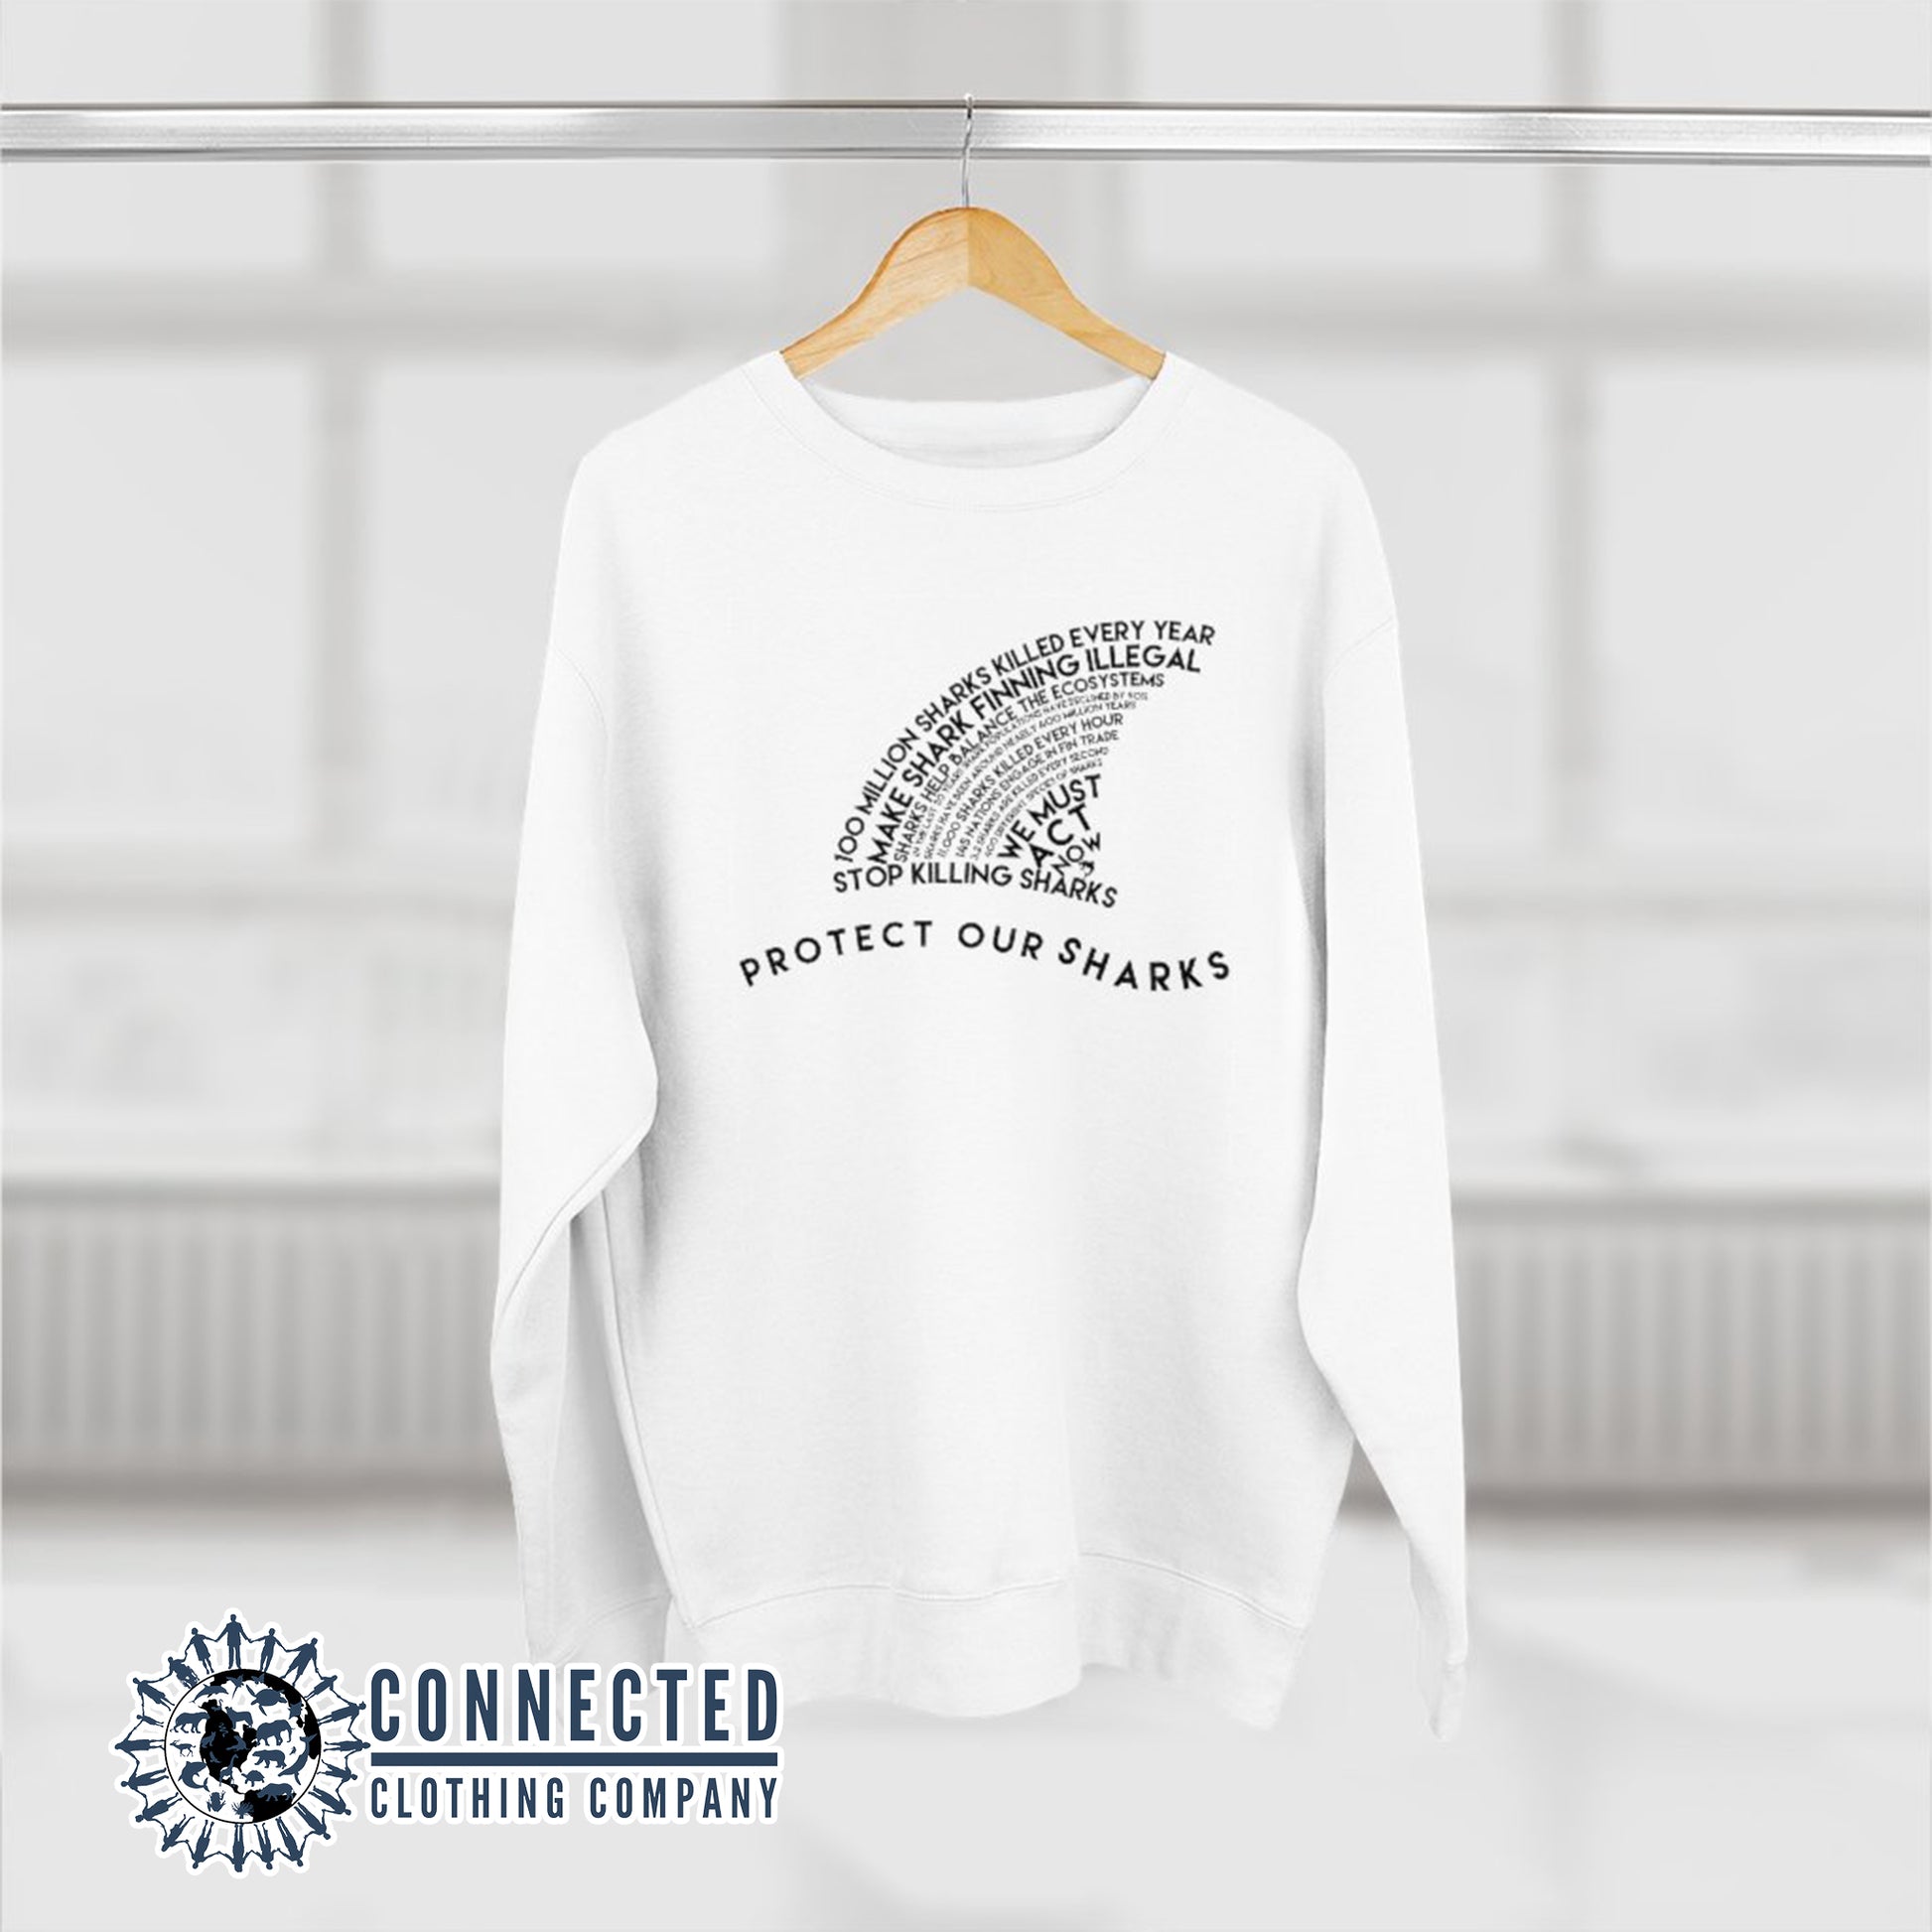 White Protect Our Sharks Unisex Crewneck Sweatshirt - Connected Clothing Company - Ethically and Sustainably Made - 10% of profits donated to shark conservation and ocean conservation